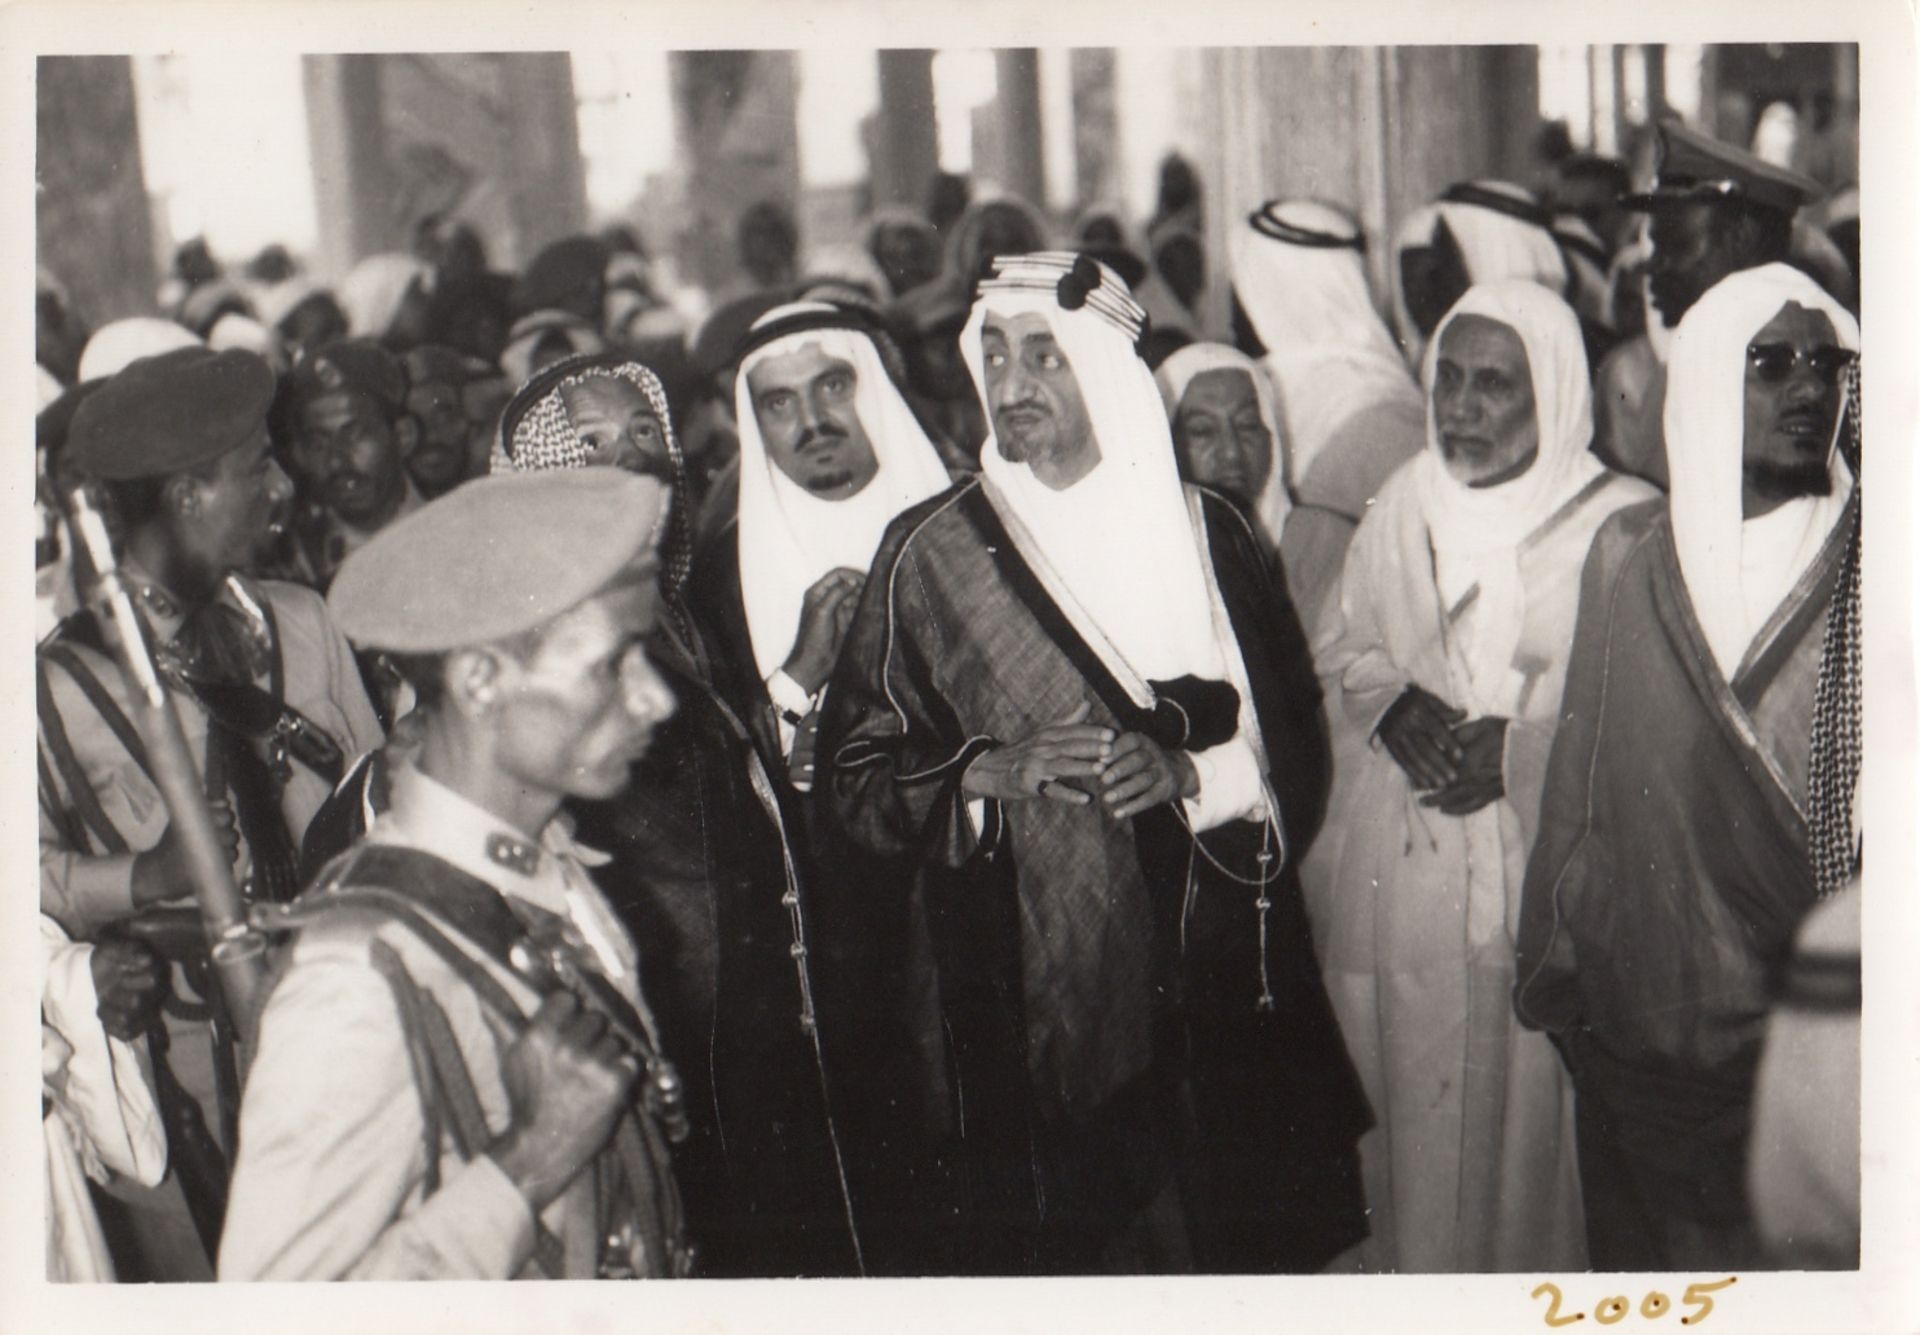 A COLLECTION OF PHOTOGRAPHS OF HIS MAJESTY KING FAISAL BIN ABDUL AZIZ VISITING THE GRAND MOSQUES OF - Image 17 of 24